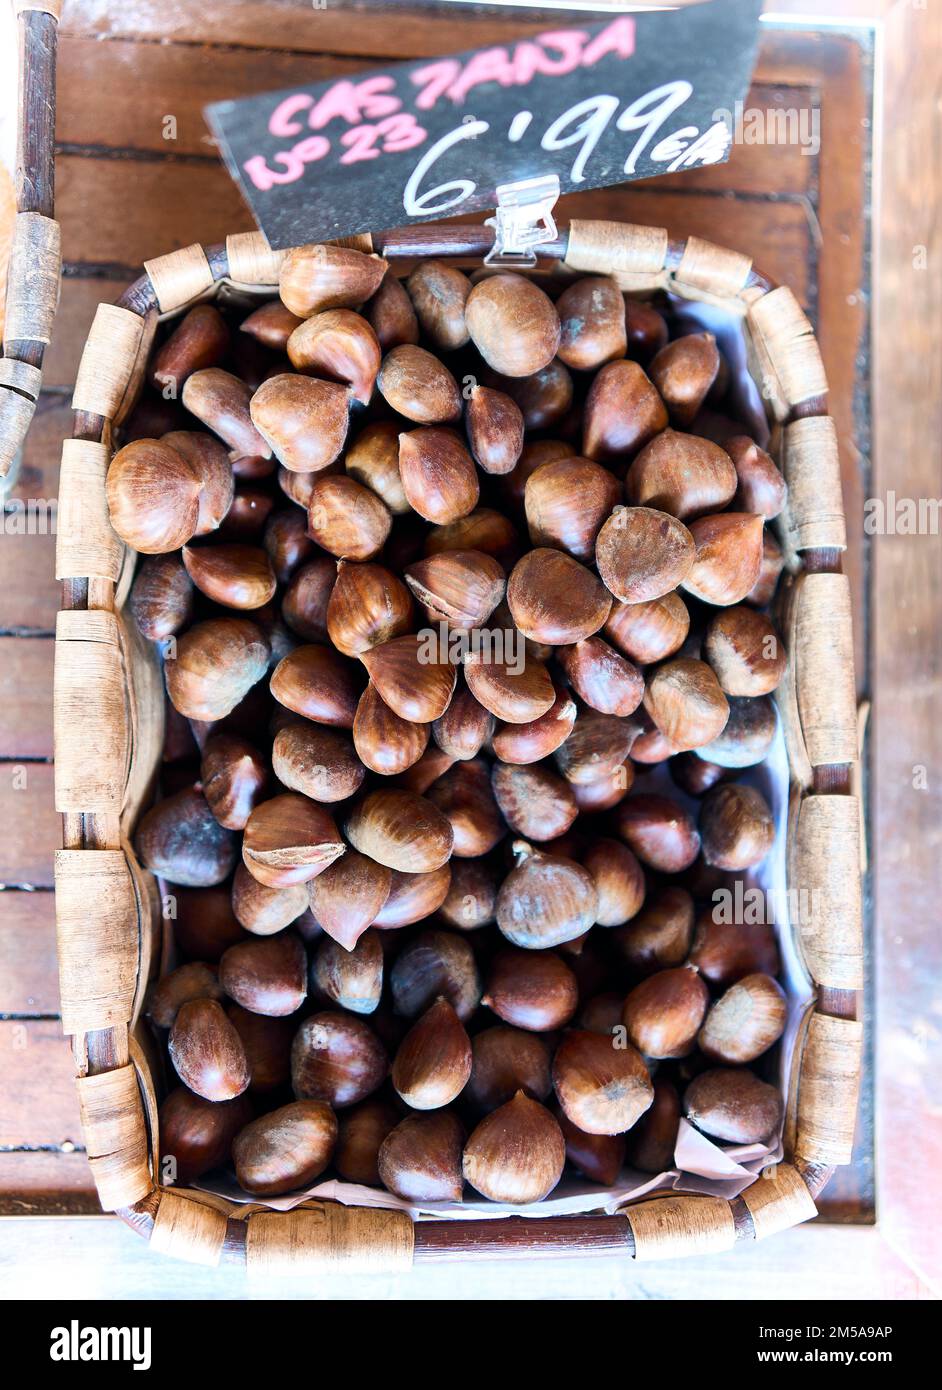 A basket of Chestnuts. Stock Photo